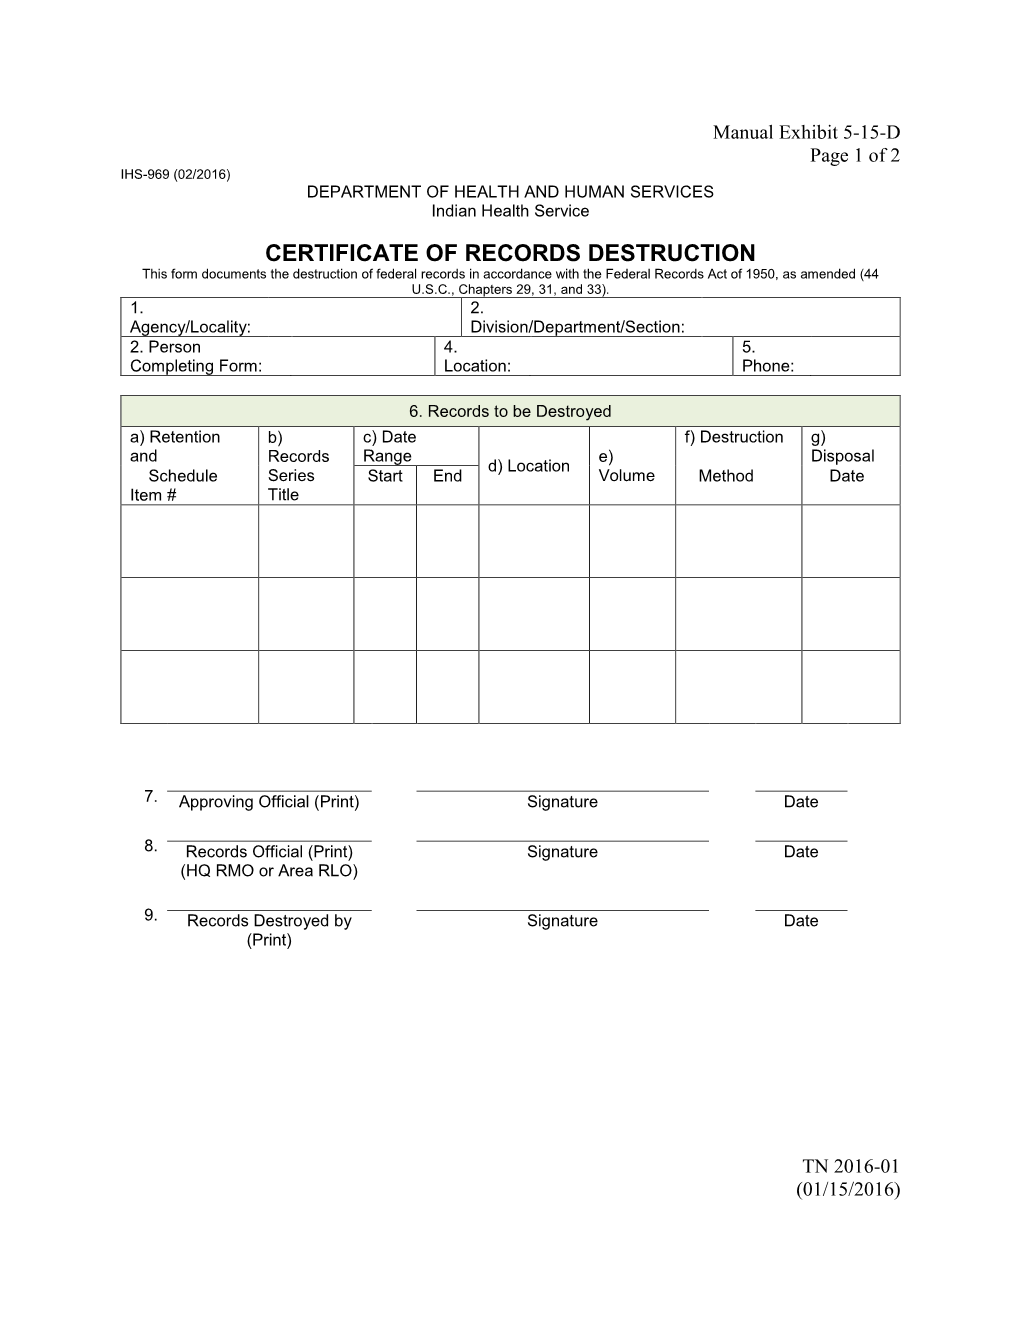 Indian Health Service, Certificate of Records Destruction